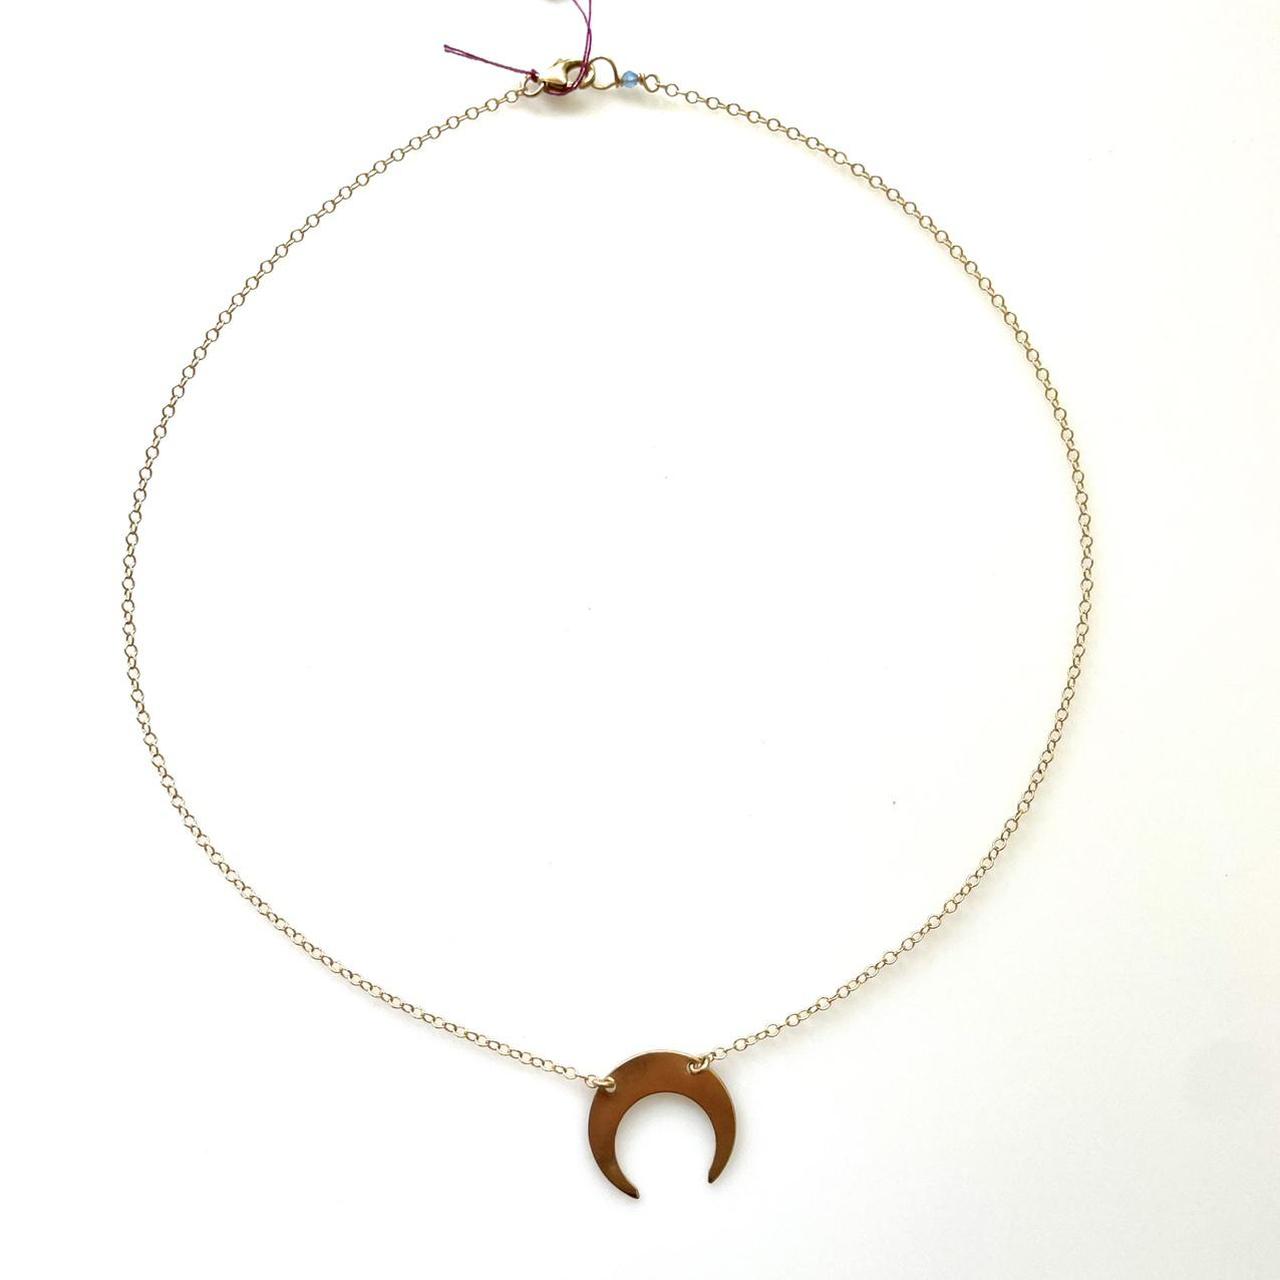 Product Image 2 - Handmade 14K Gold fill Crescent